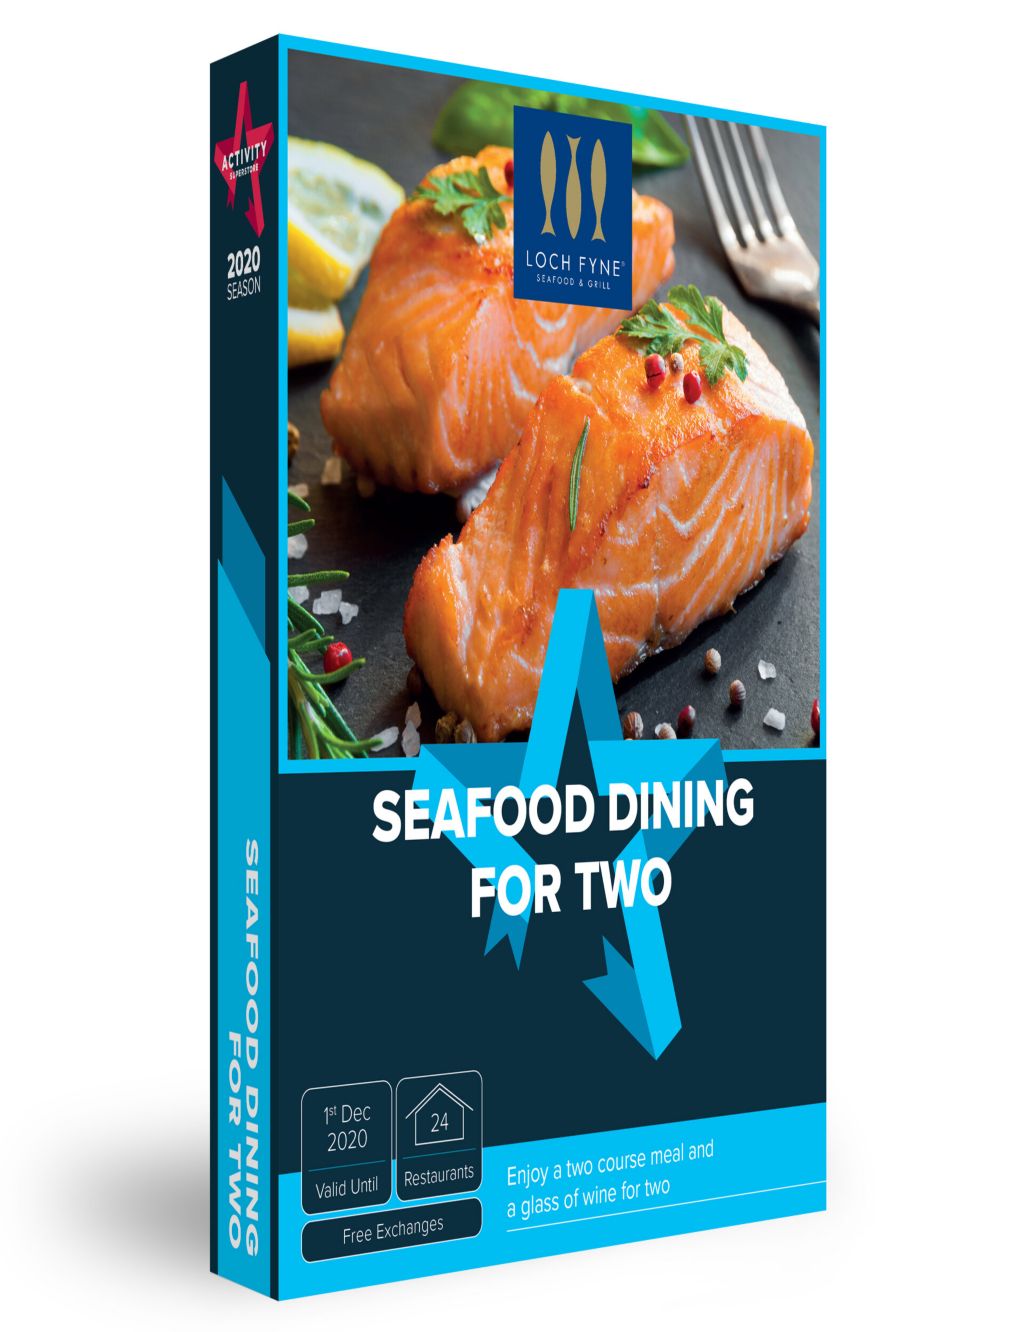 Seafood Dining for Two - Gift Experience Voucher 3 of 3